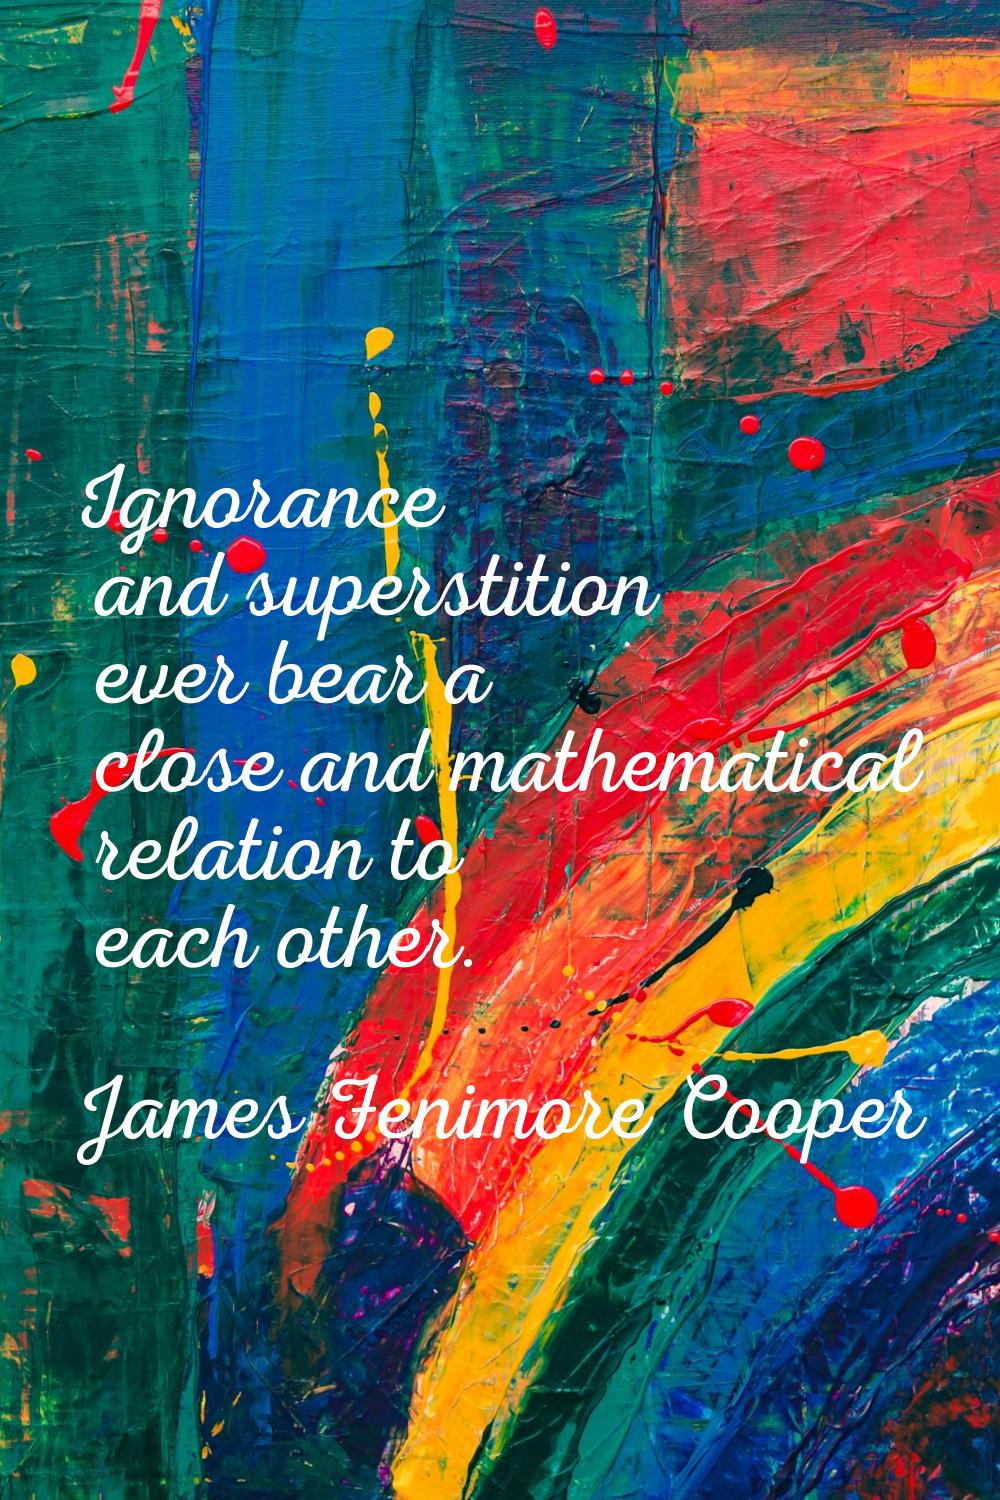 Ignorance and superstition ever bear a close and mathematical relation to each other.